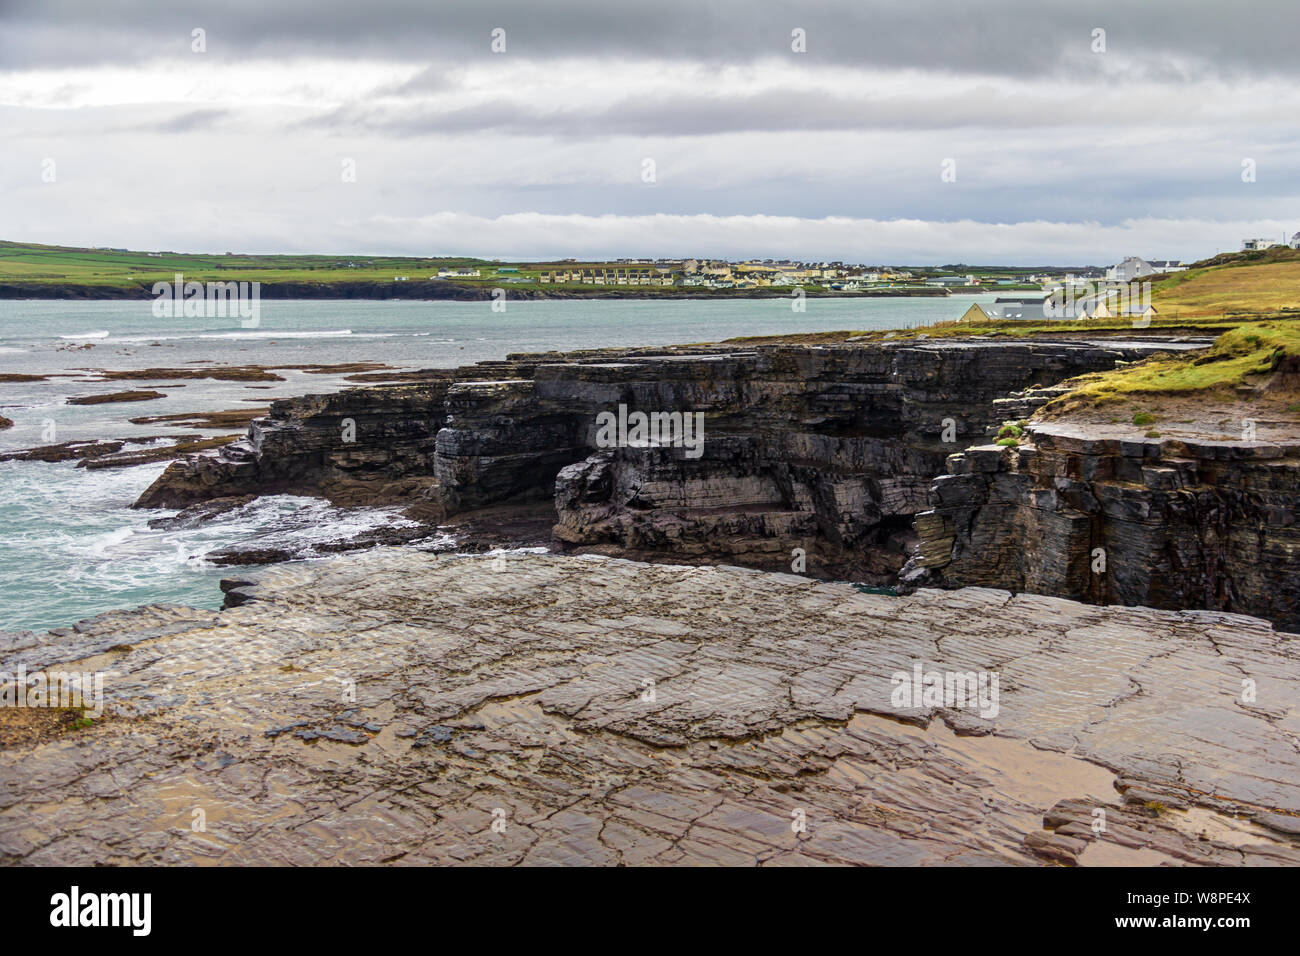 Surrounding the seaside town of Kilkee, County Clare, Ireland are interesting cliffs with many unique rock formations Stock Photo